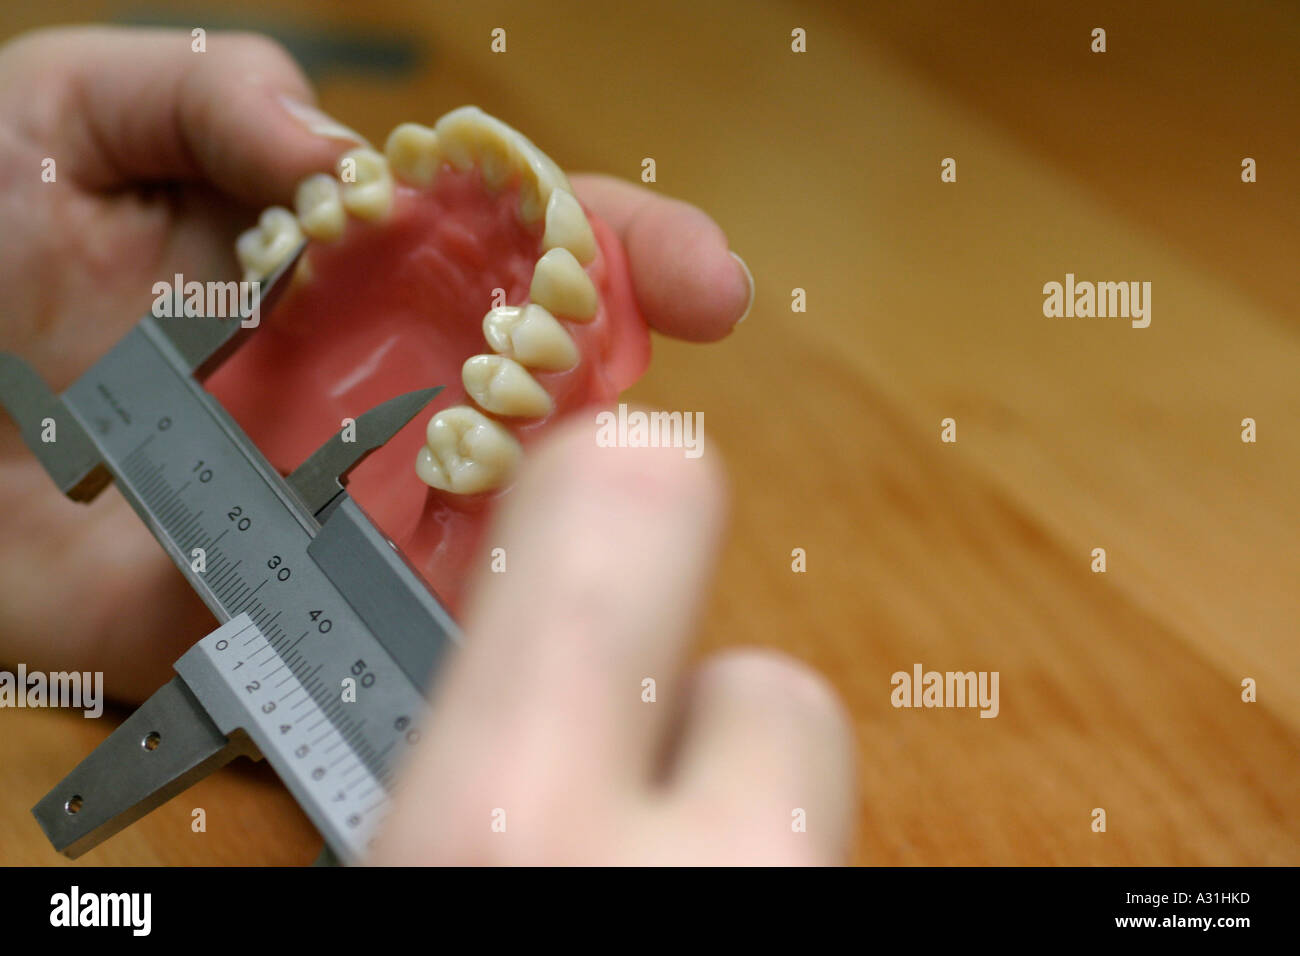 Woman measuring dentures close up elevated view Stock Photo